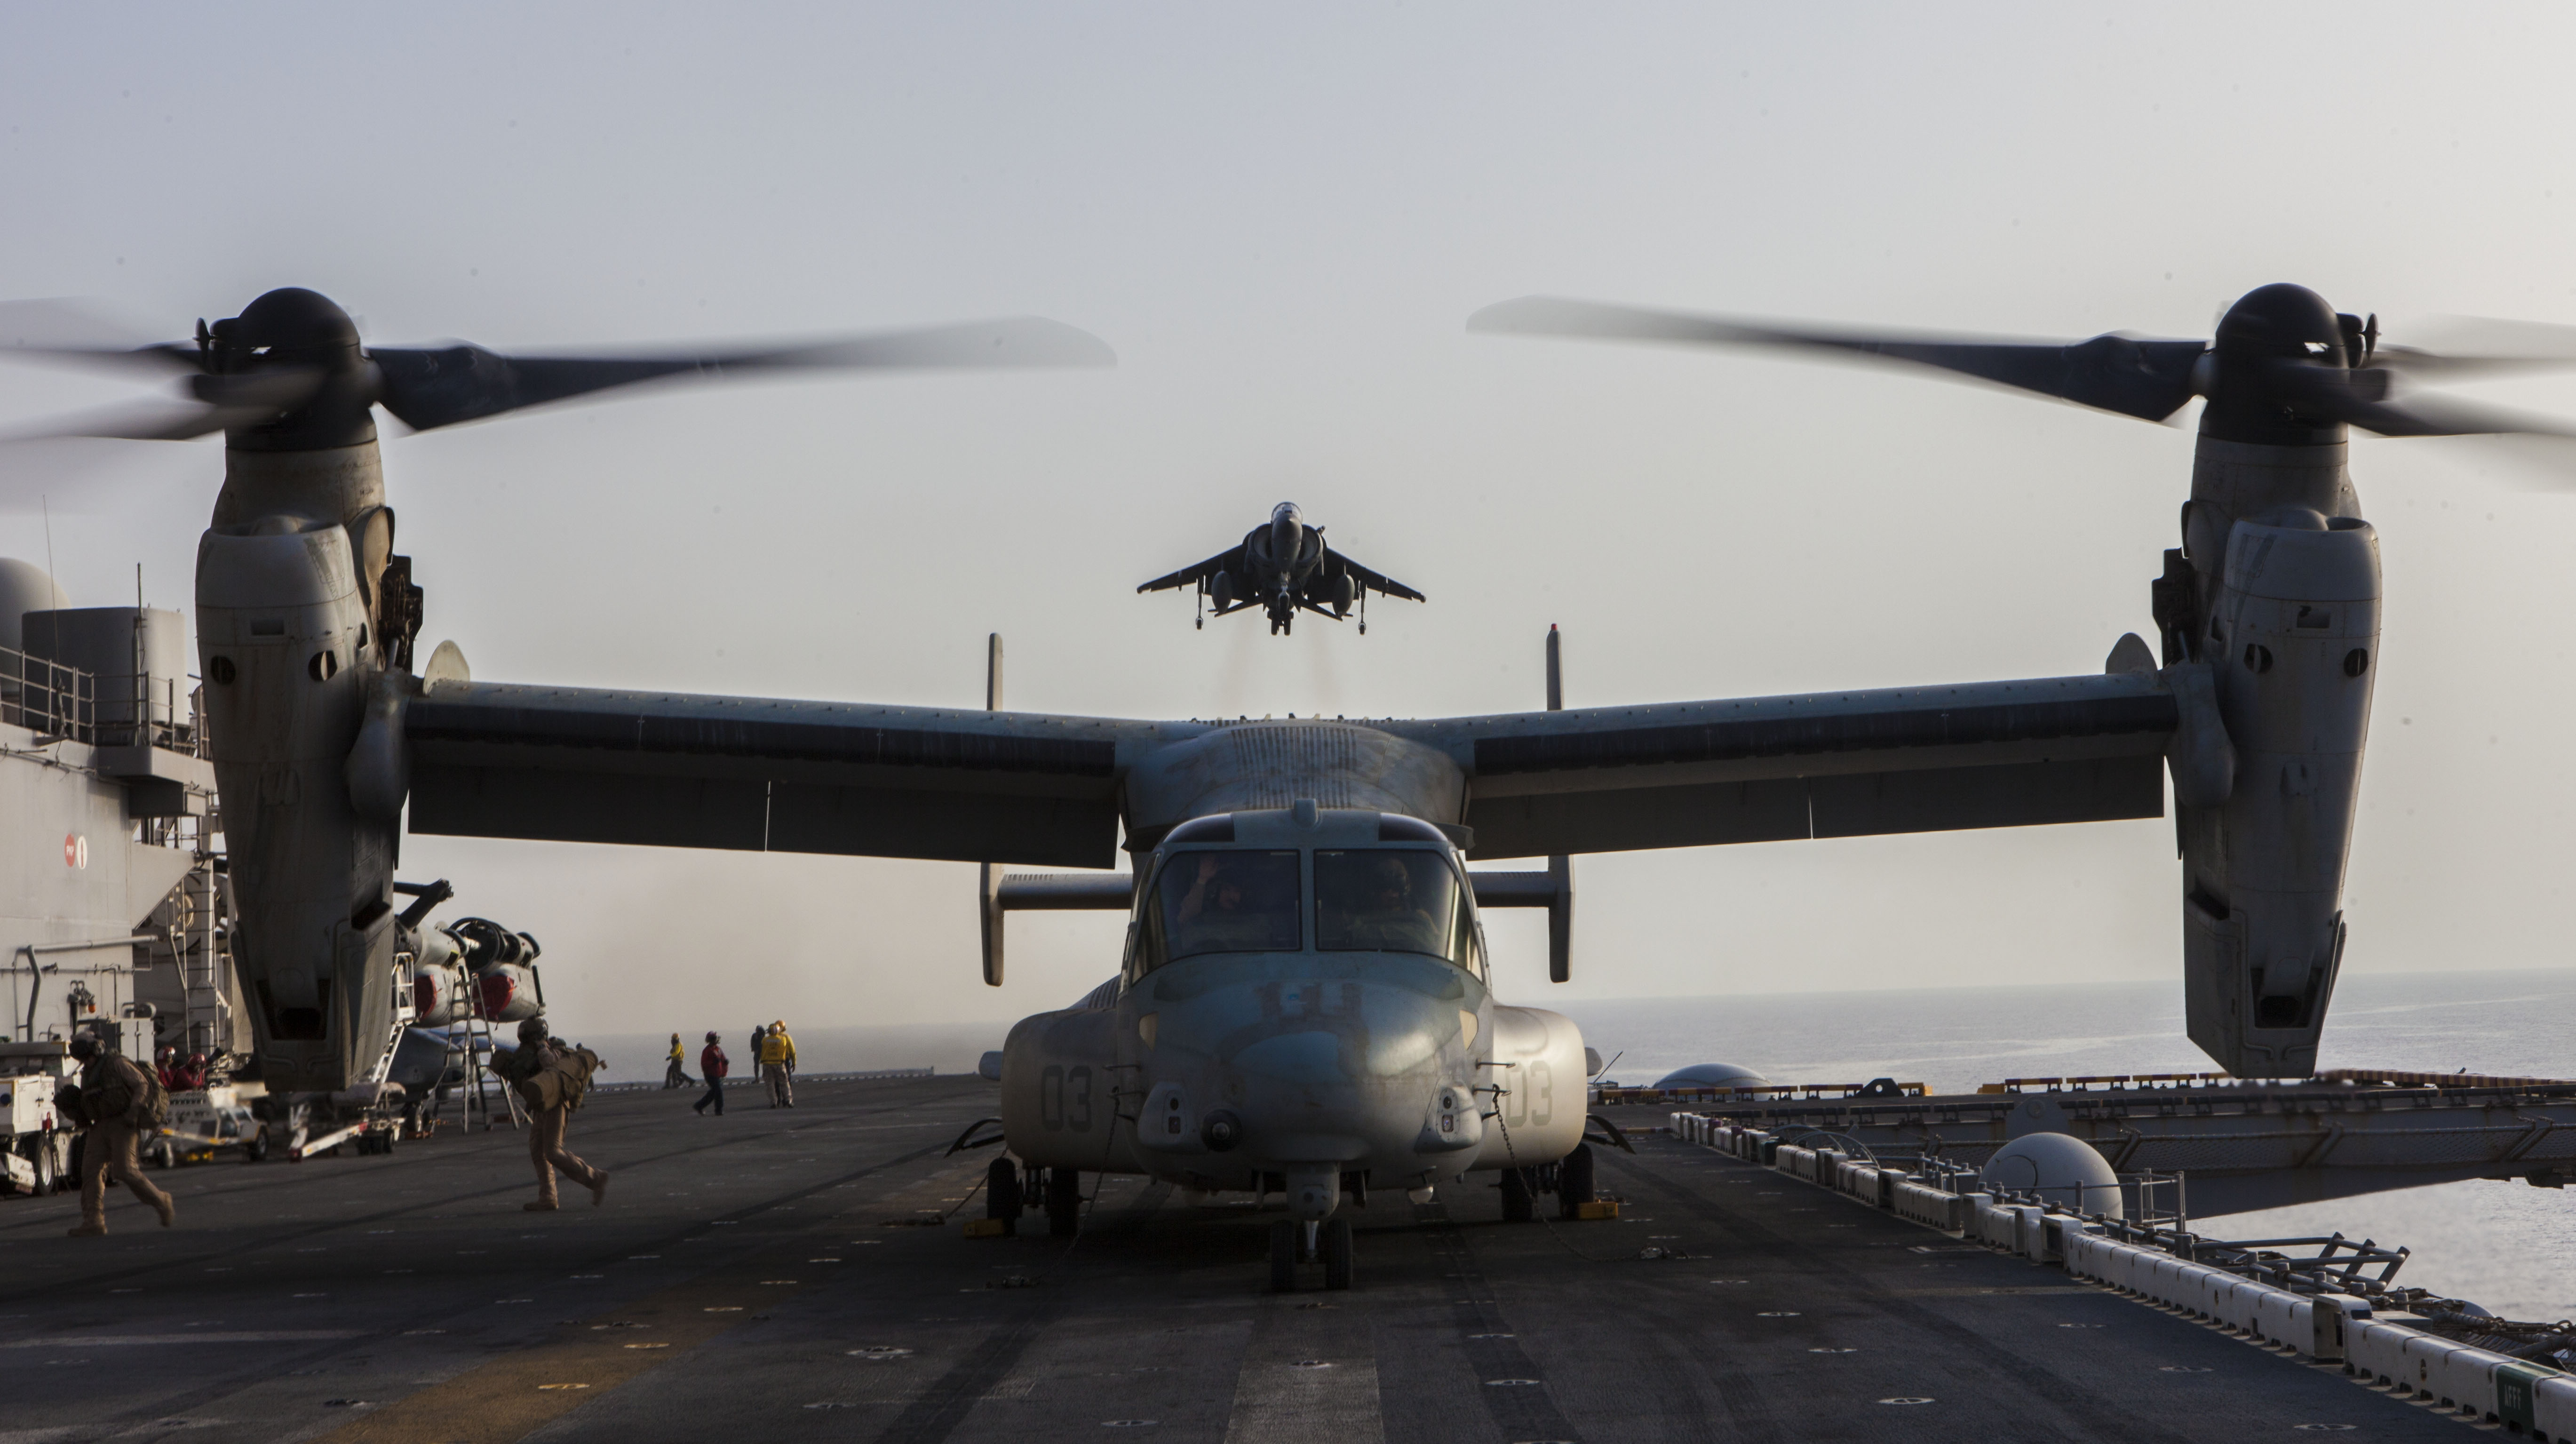 A U.S. Marine Corps AV-8B Harrier aircraft, top, assigned to Marine Medium Tiltrotor Squadron (VMM) 266 approaches the flight deck of the amphibious assault ship USS Kearsarge (LHD 3) as an MV-22B Osprey tiltrotor aircraft prepares to take off May 27, 2013, in the U.S. 5th Fleet area of responsibility. (DoD photo by Sgt. Christopher Q. Stone, U.S. Marine Corps/Released)